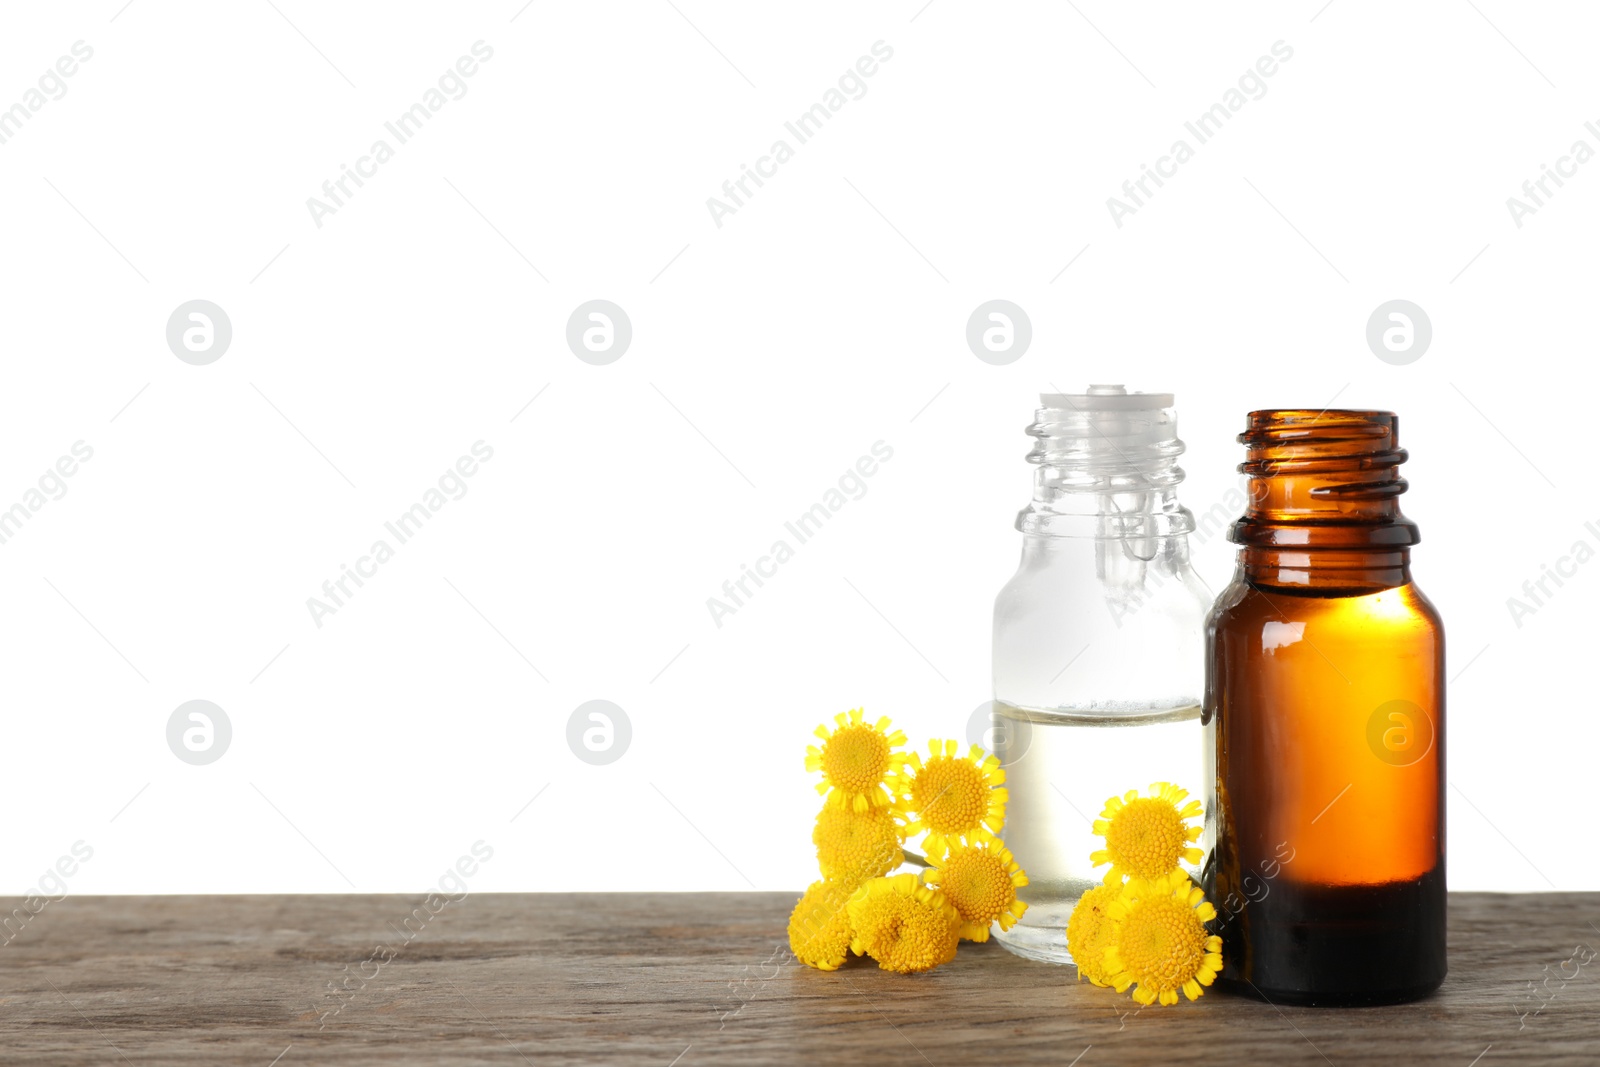 Photo of Bottles of essential oil and flowers on wooden table, white background